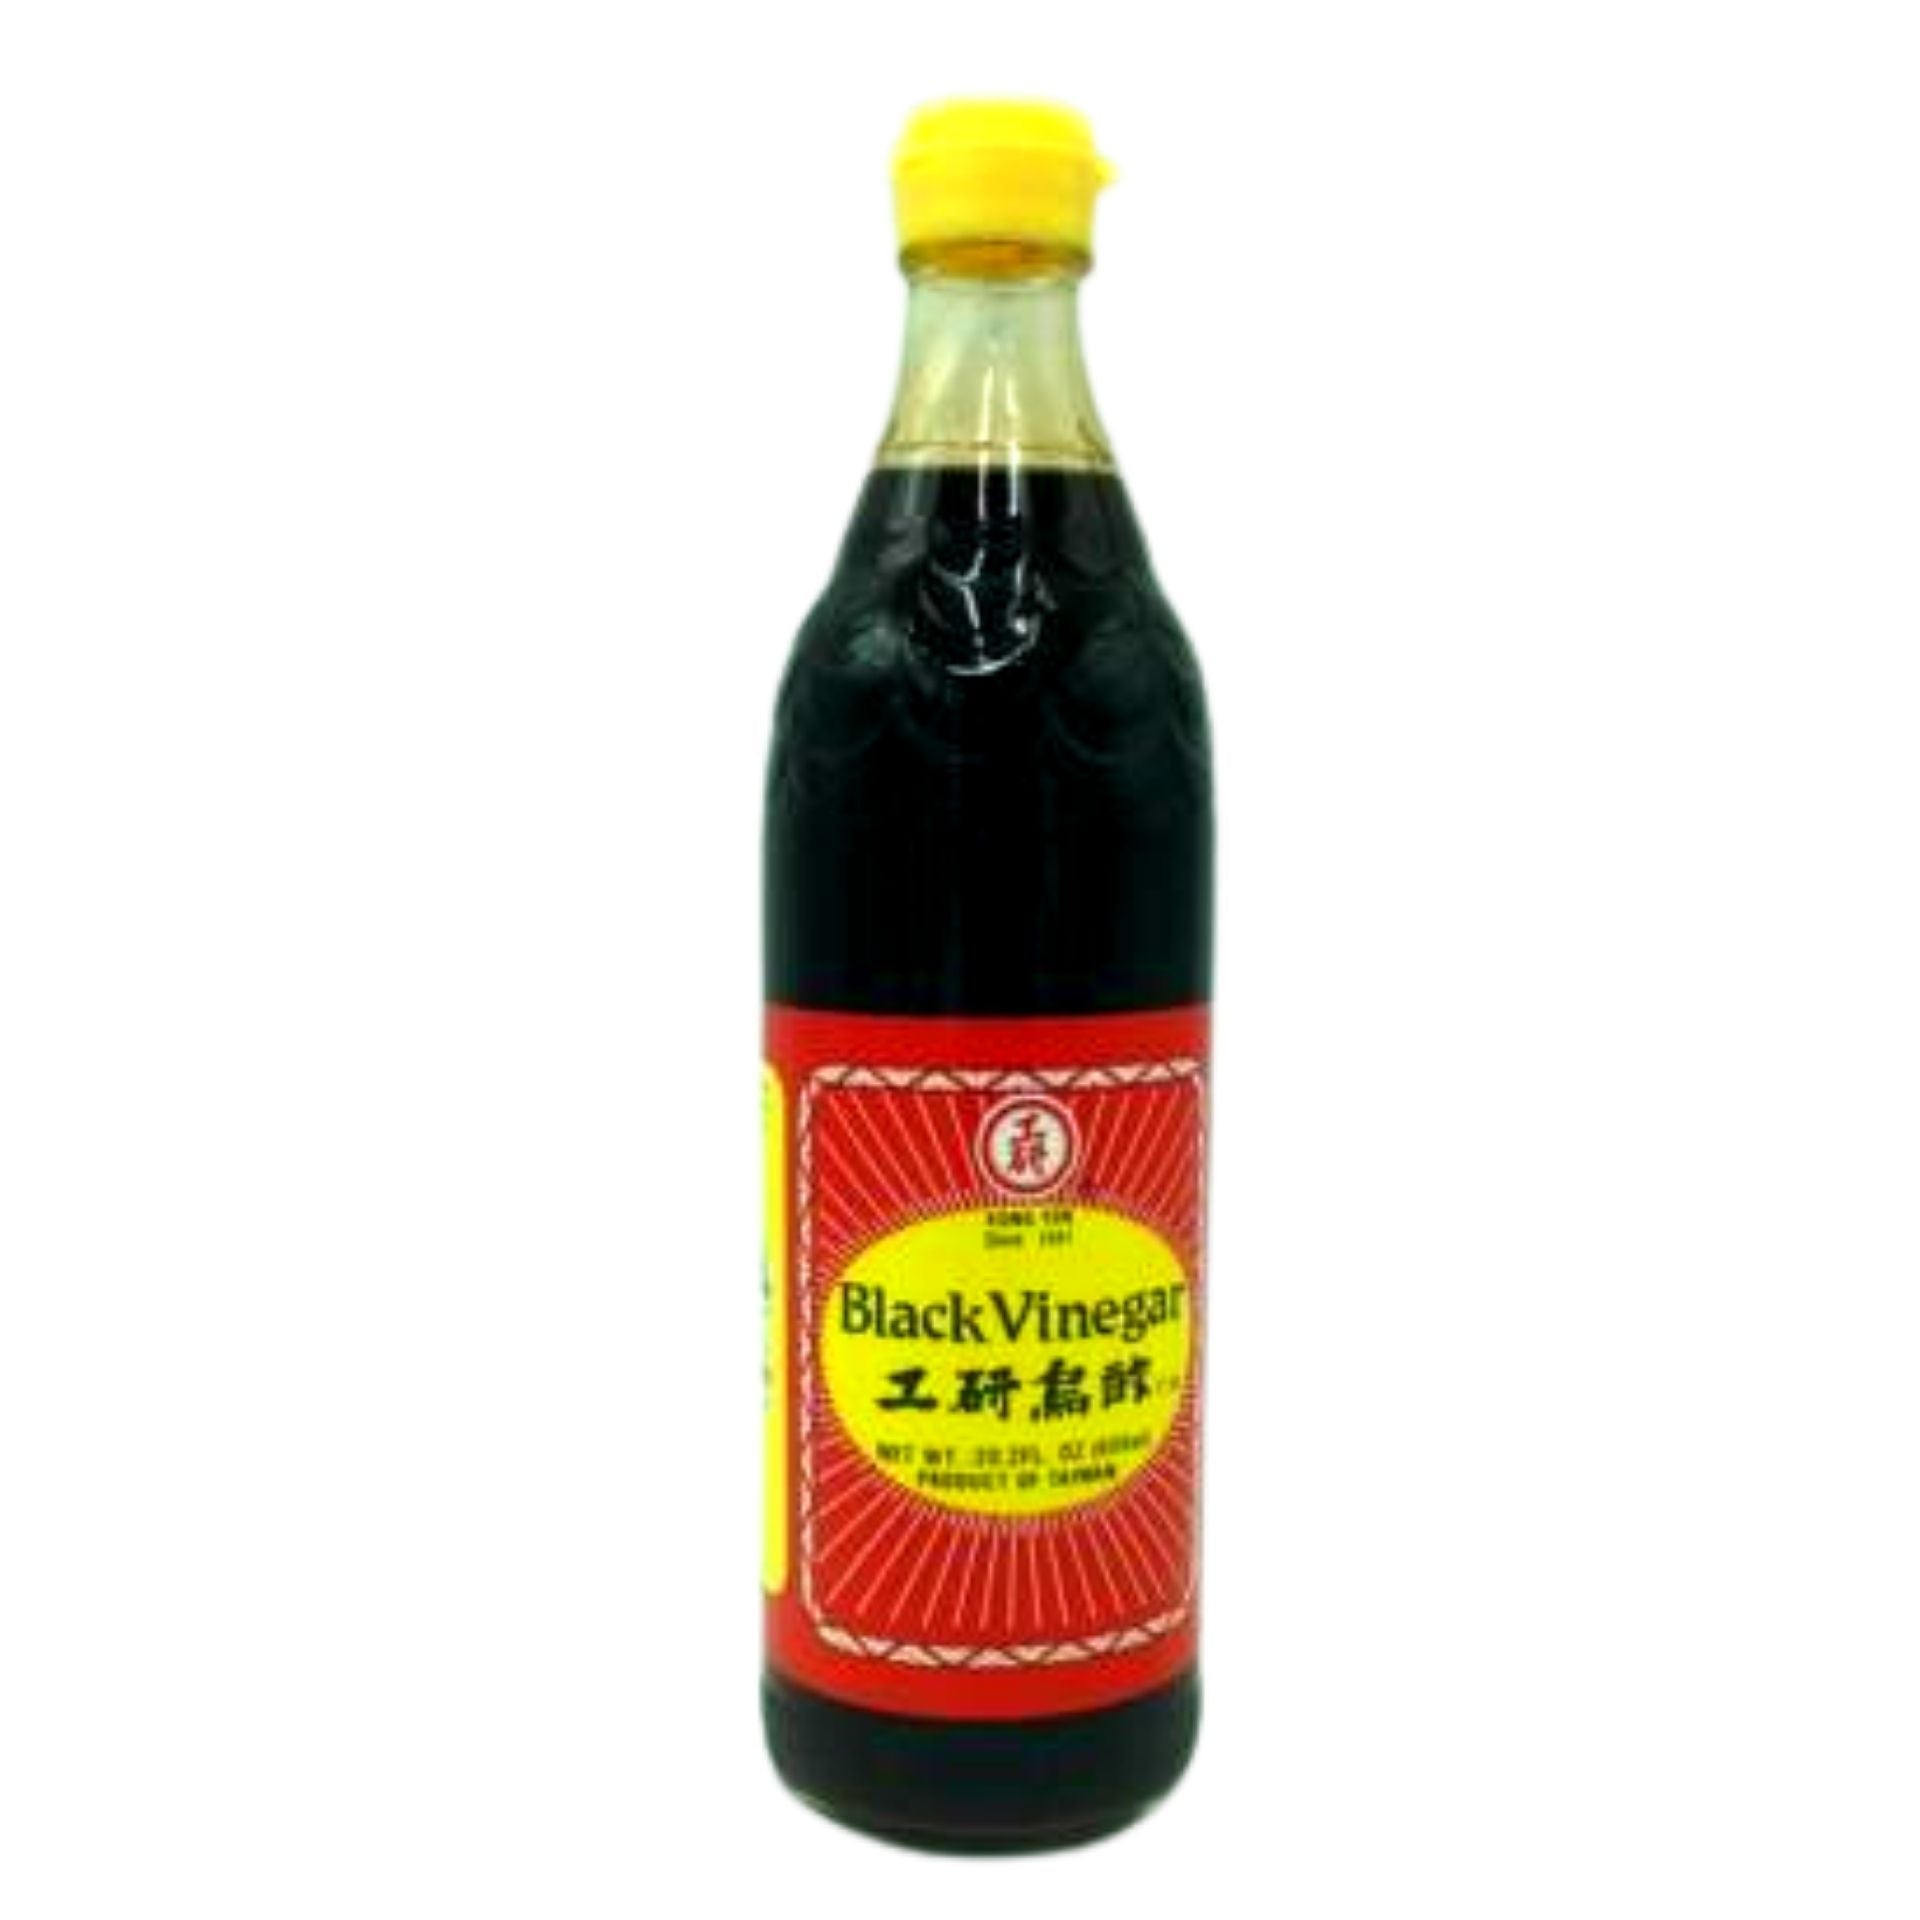 This is a Chinese Black Vinegar